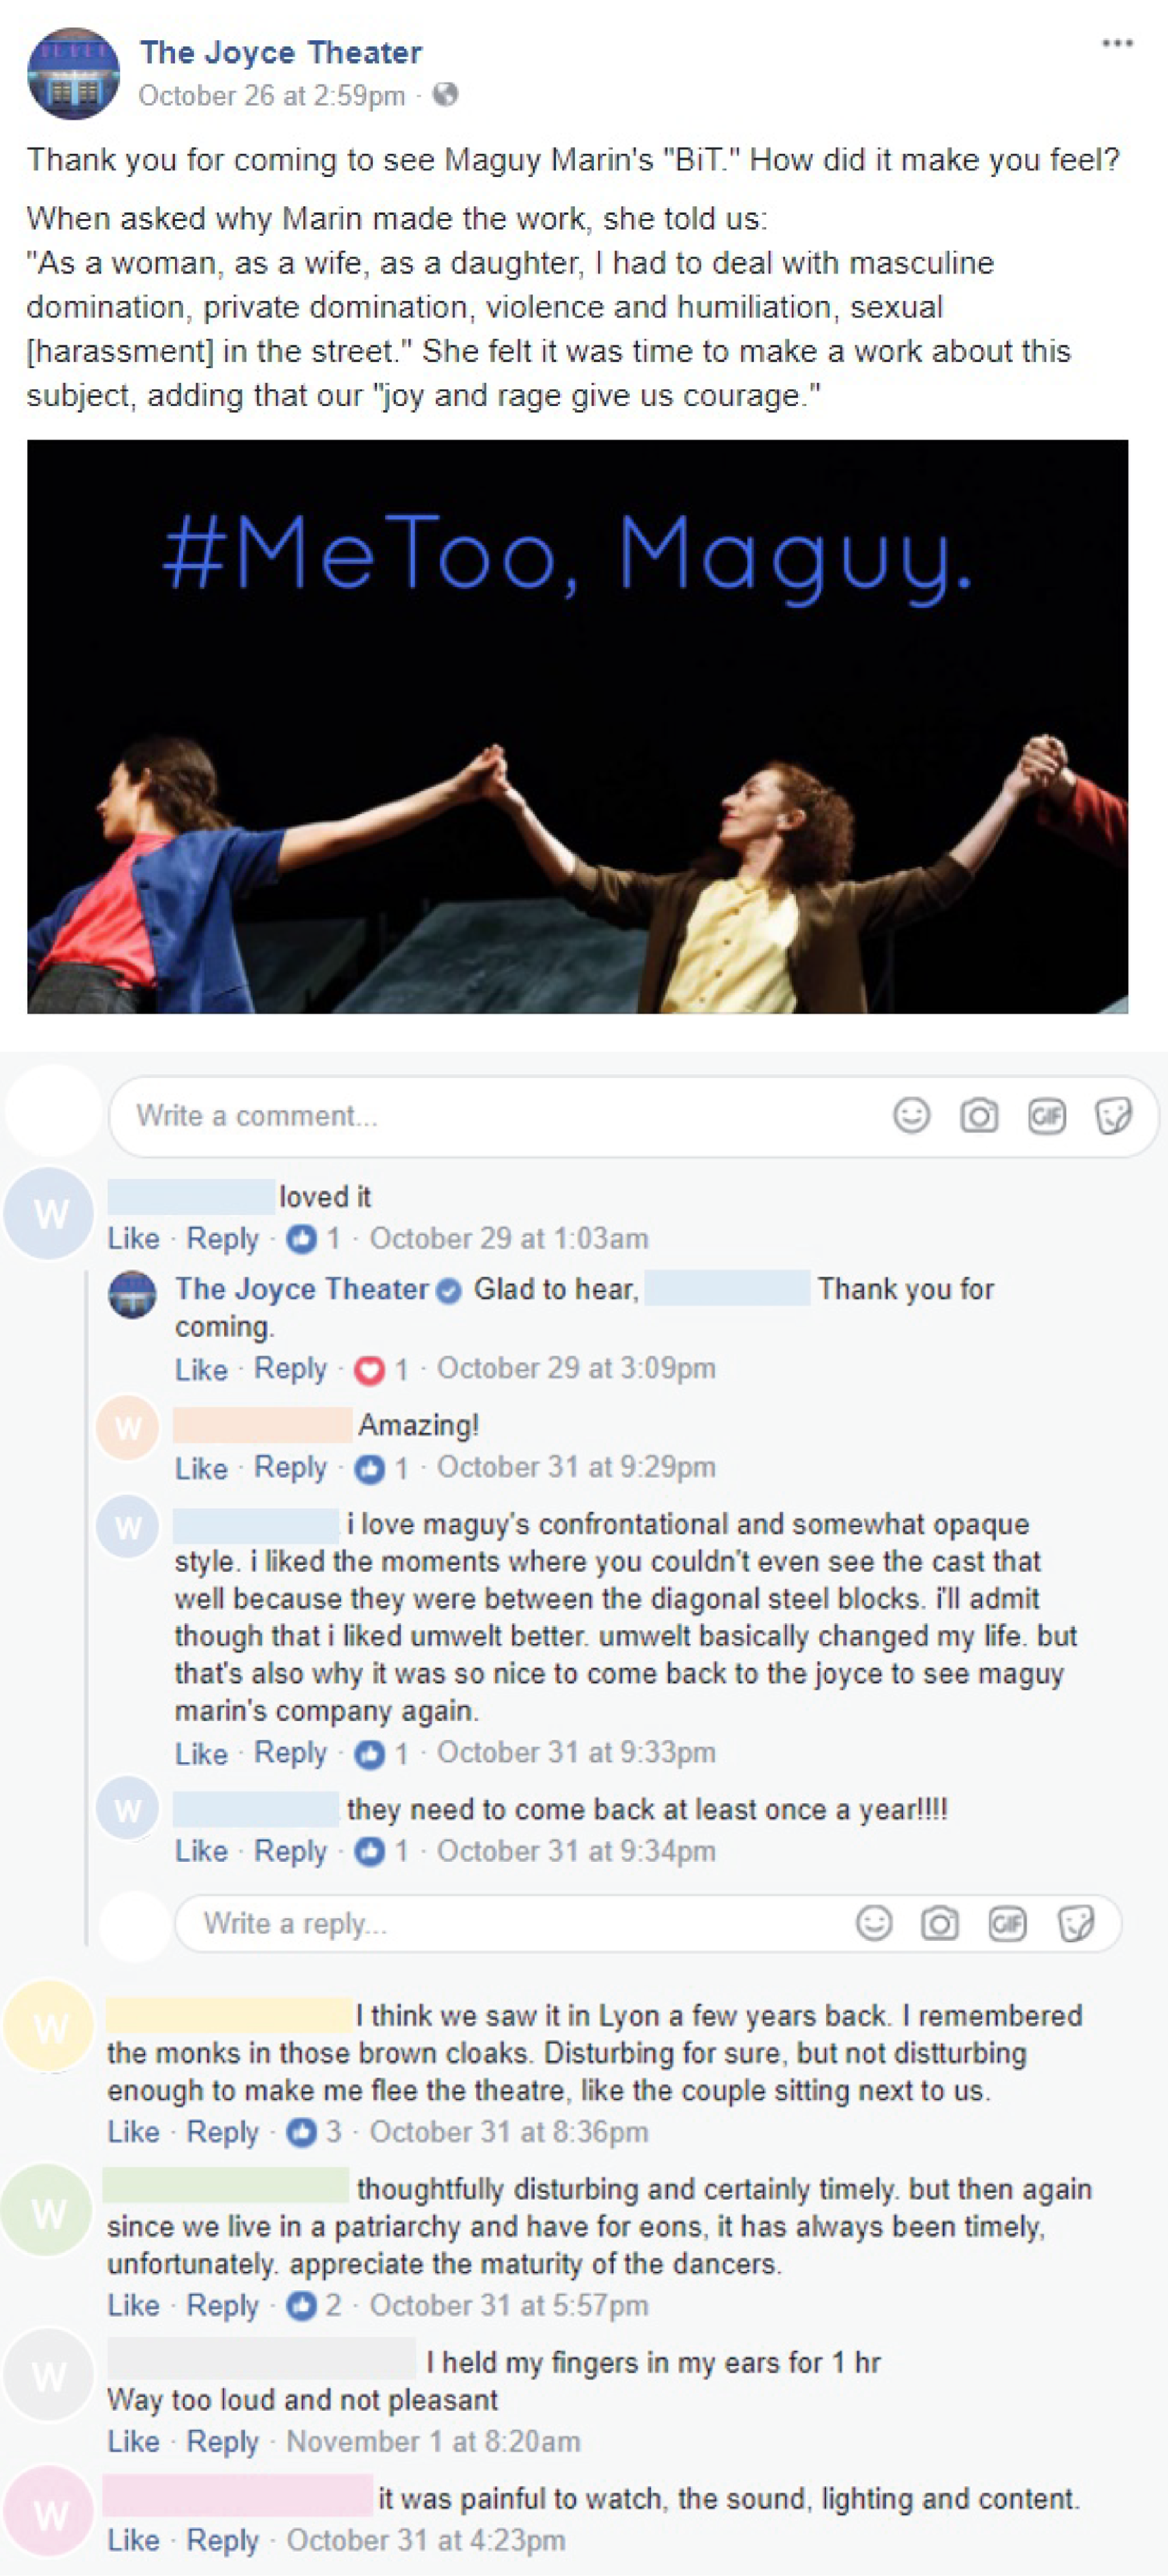 The Joyce Theater's post with comments served to Female Identifying Patrons